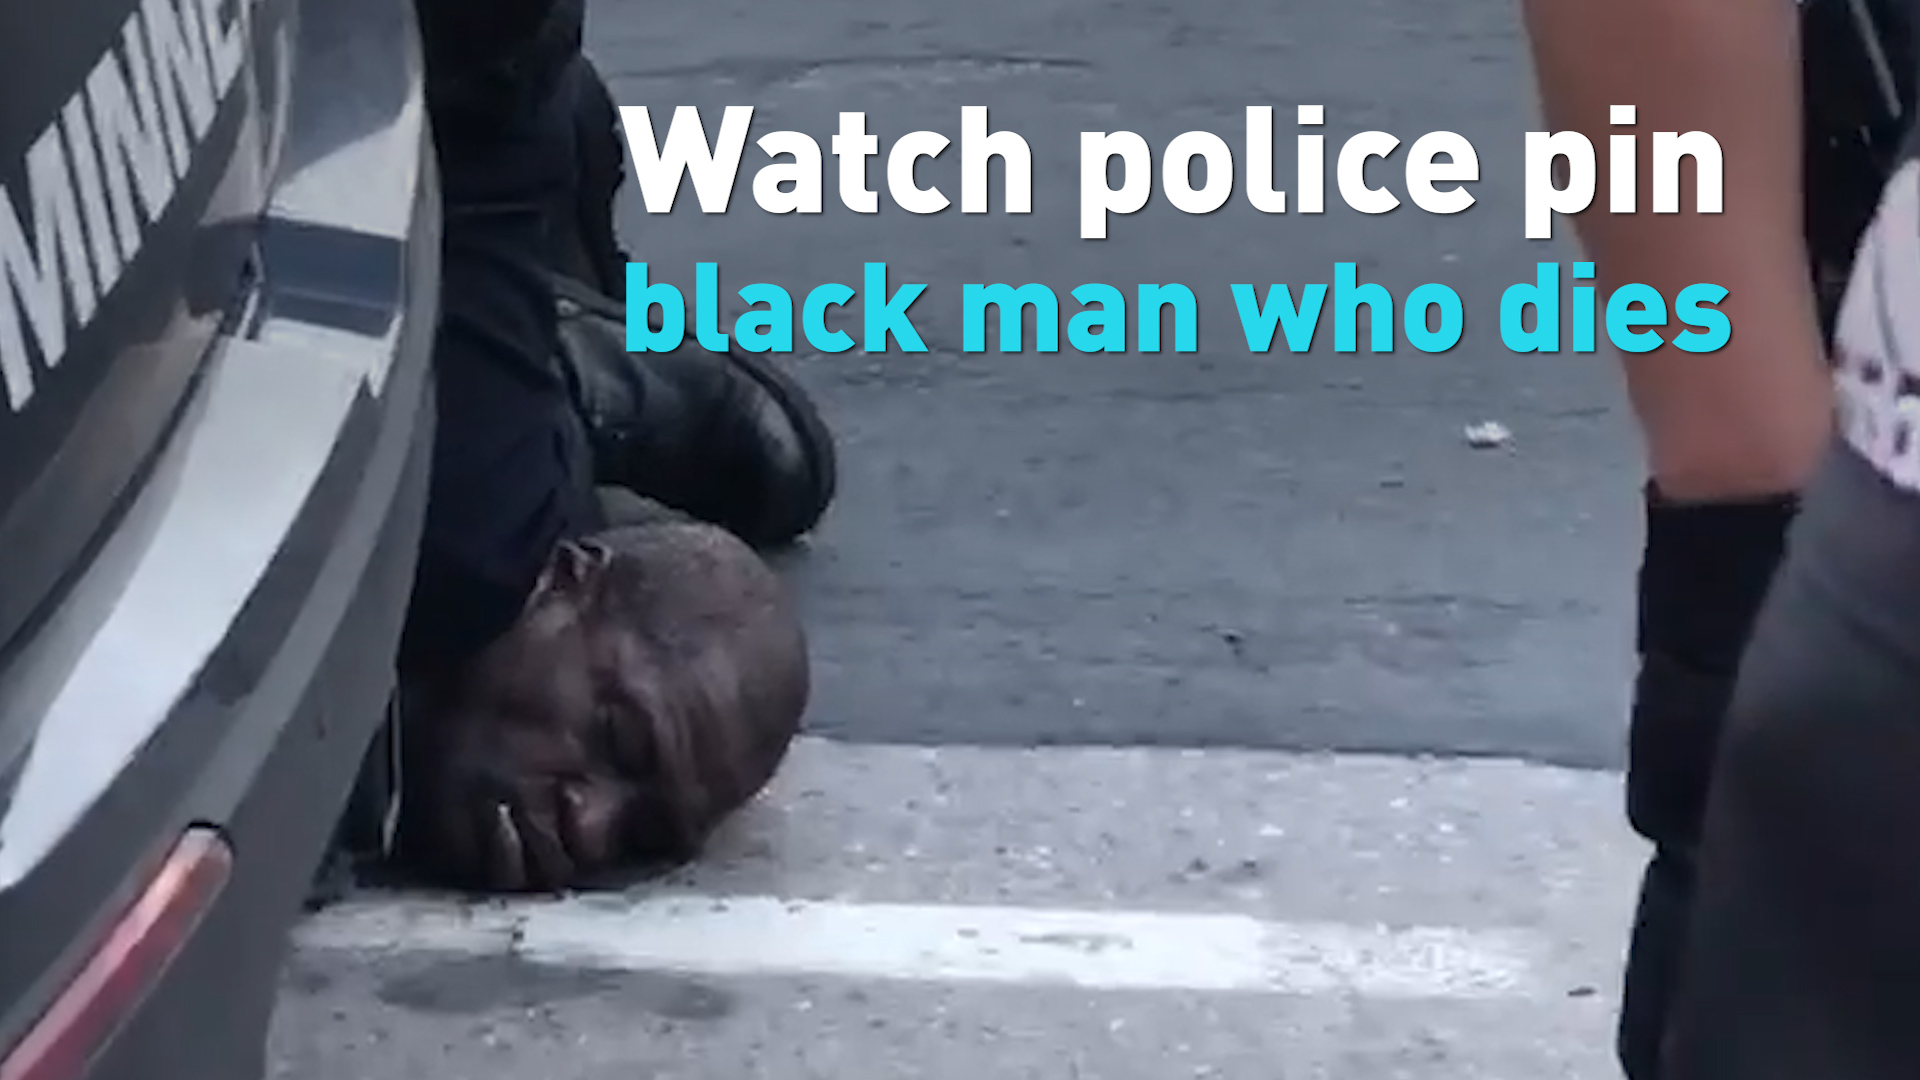 I can't breathe." Black man dies after being pinned by police in ...